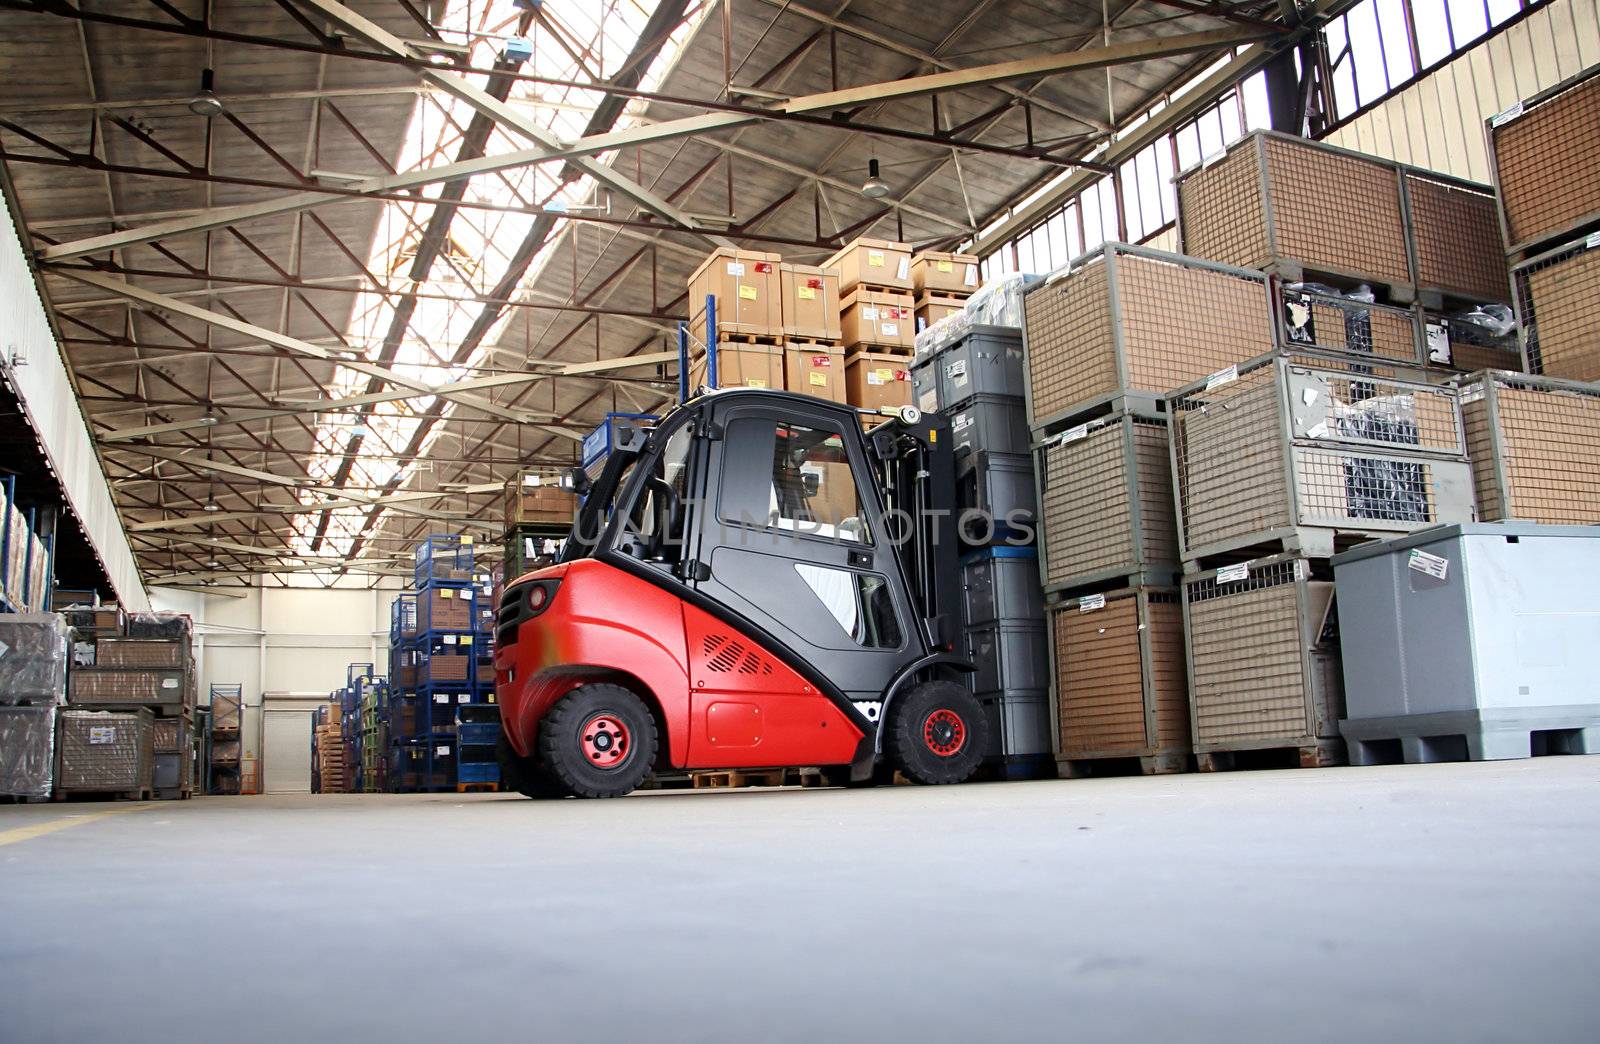 Forklift in a big warehouse with palettes